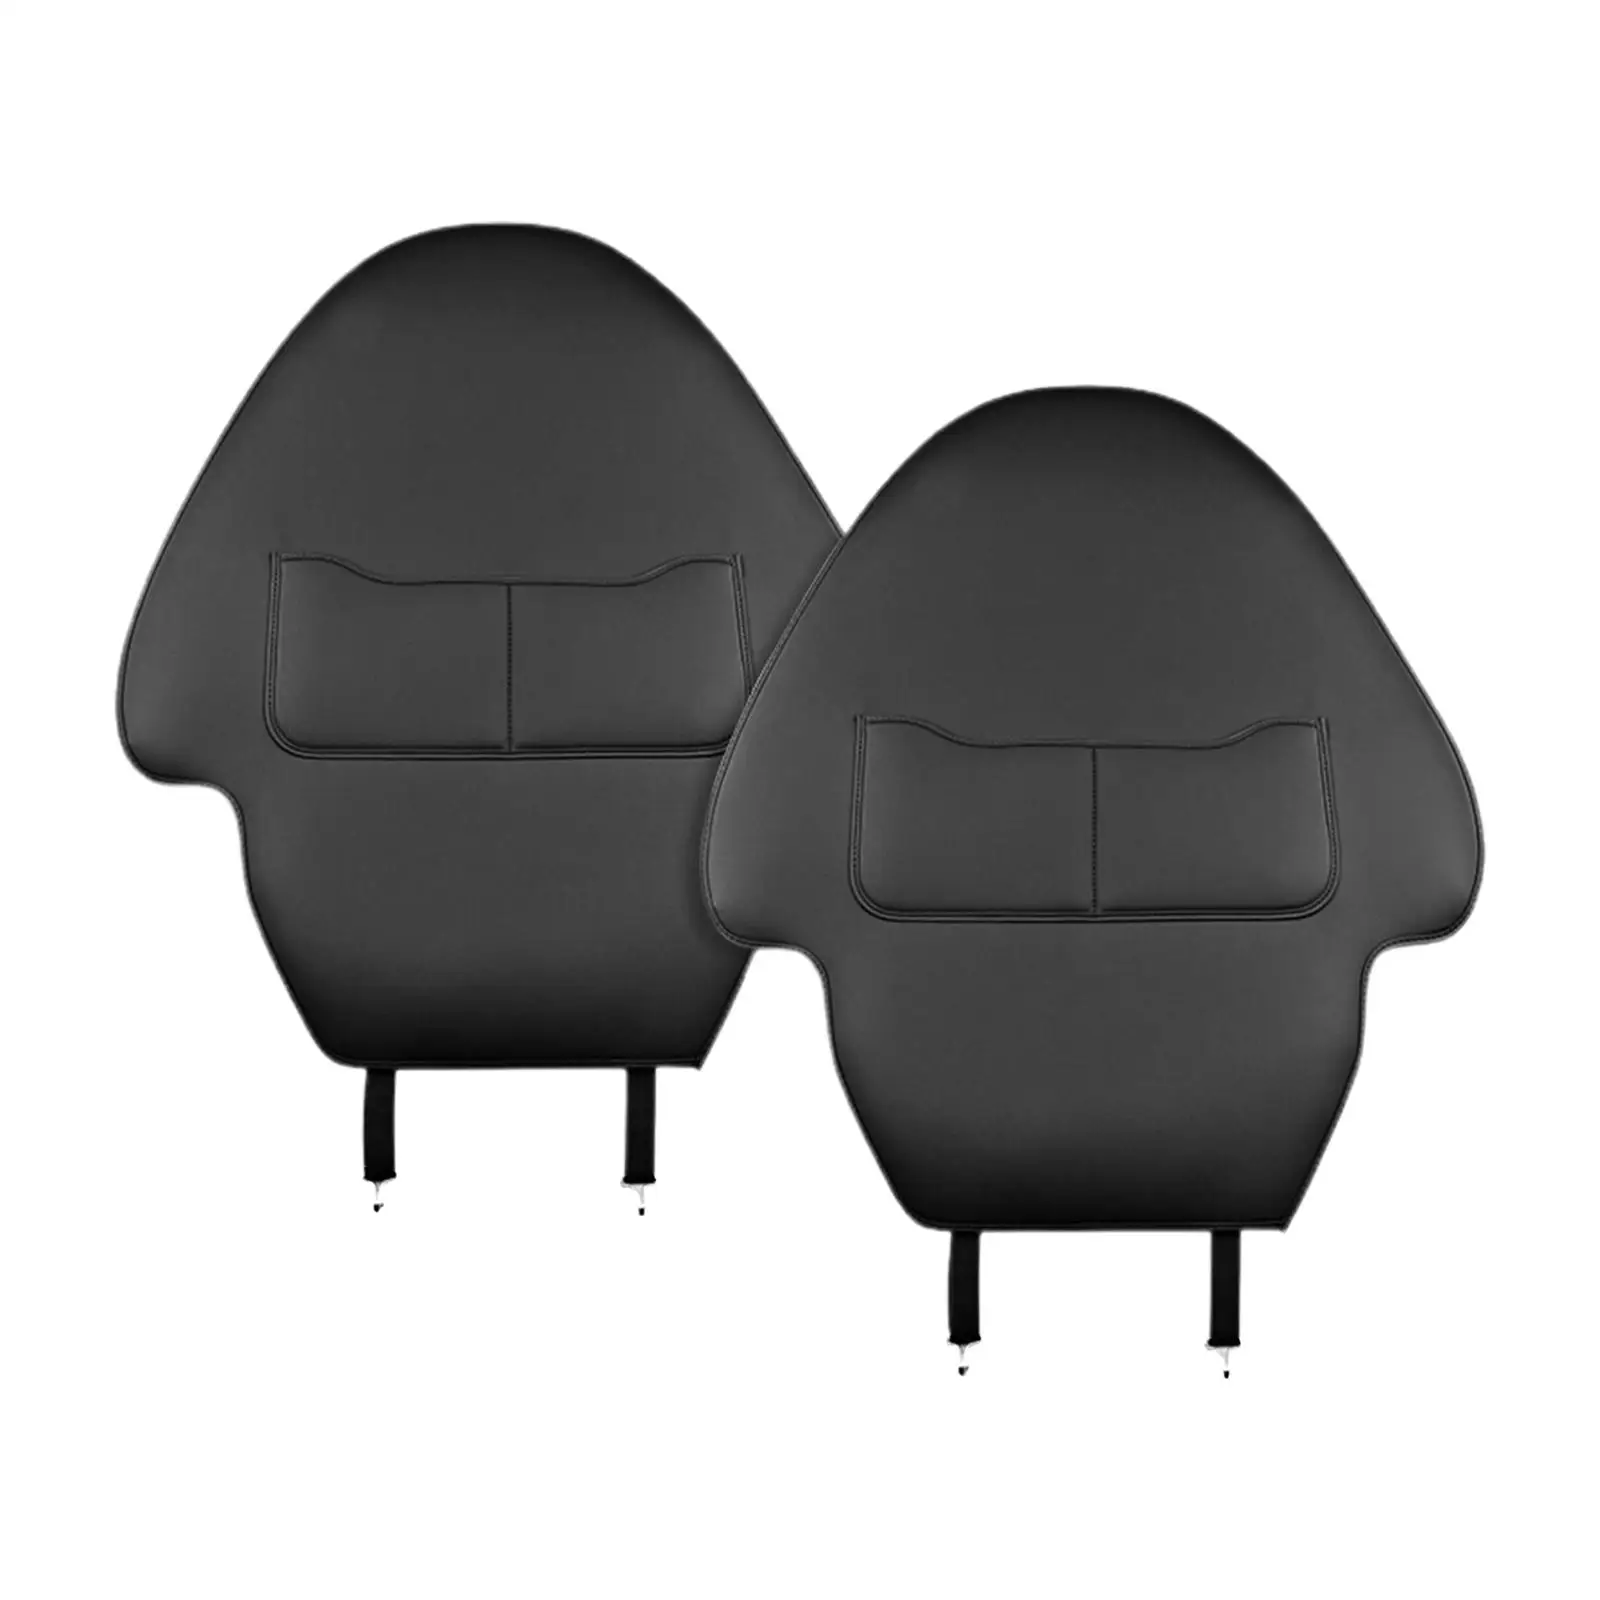 Seat back Anti Kick Pad Protector Replaces Seat Back Cover Kick Mats for Tesla Model 3 Model Y Durable Easy to Install